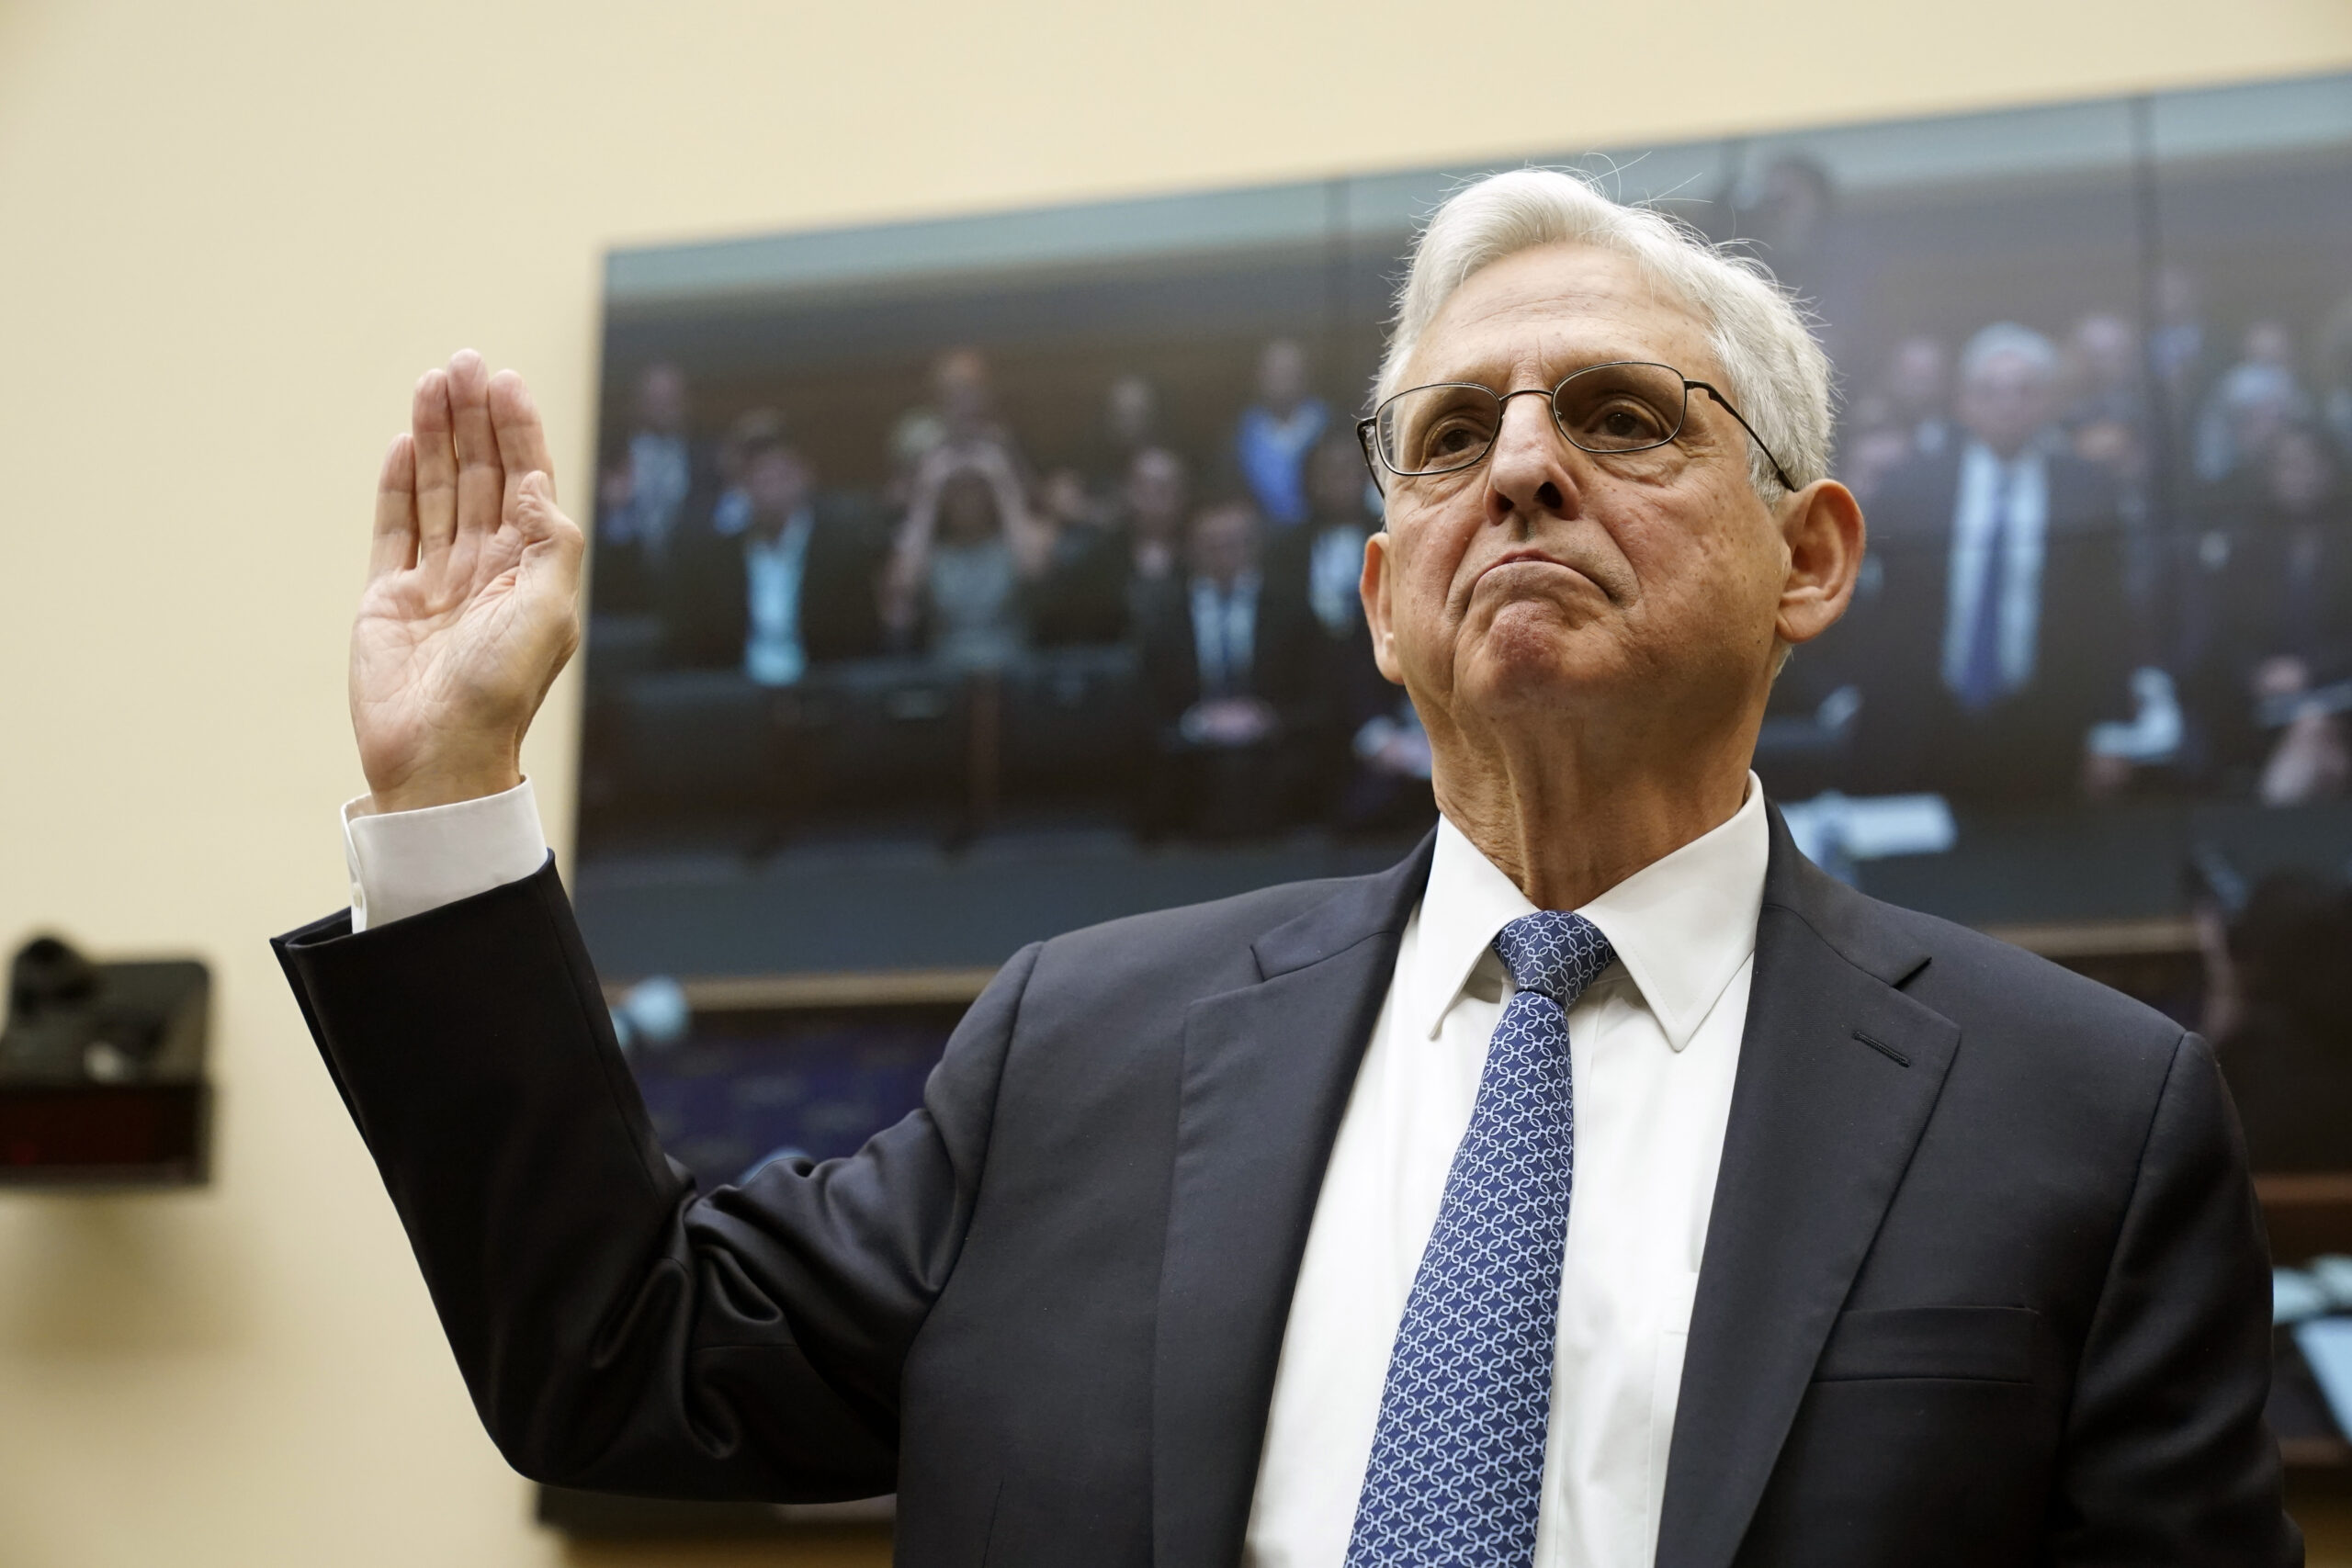 Attorney General Merrick Garland is sworn in at the start of a House Judiciary Committee hearing, W...